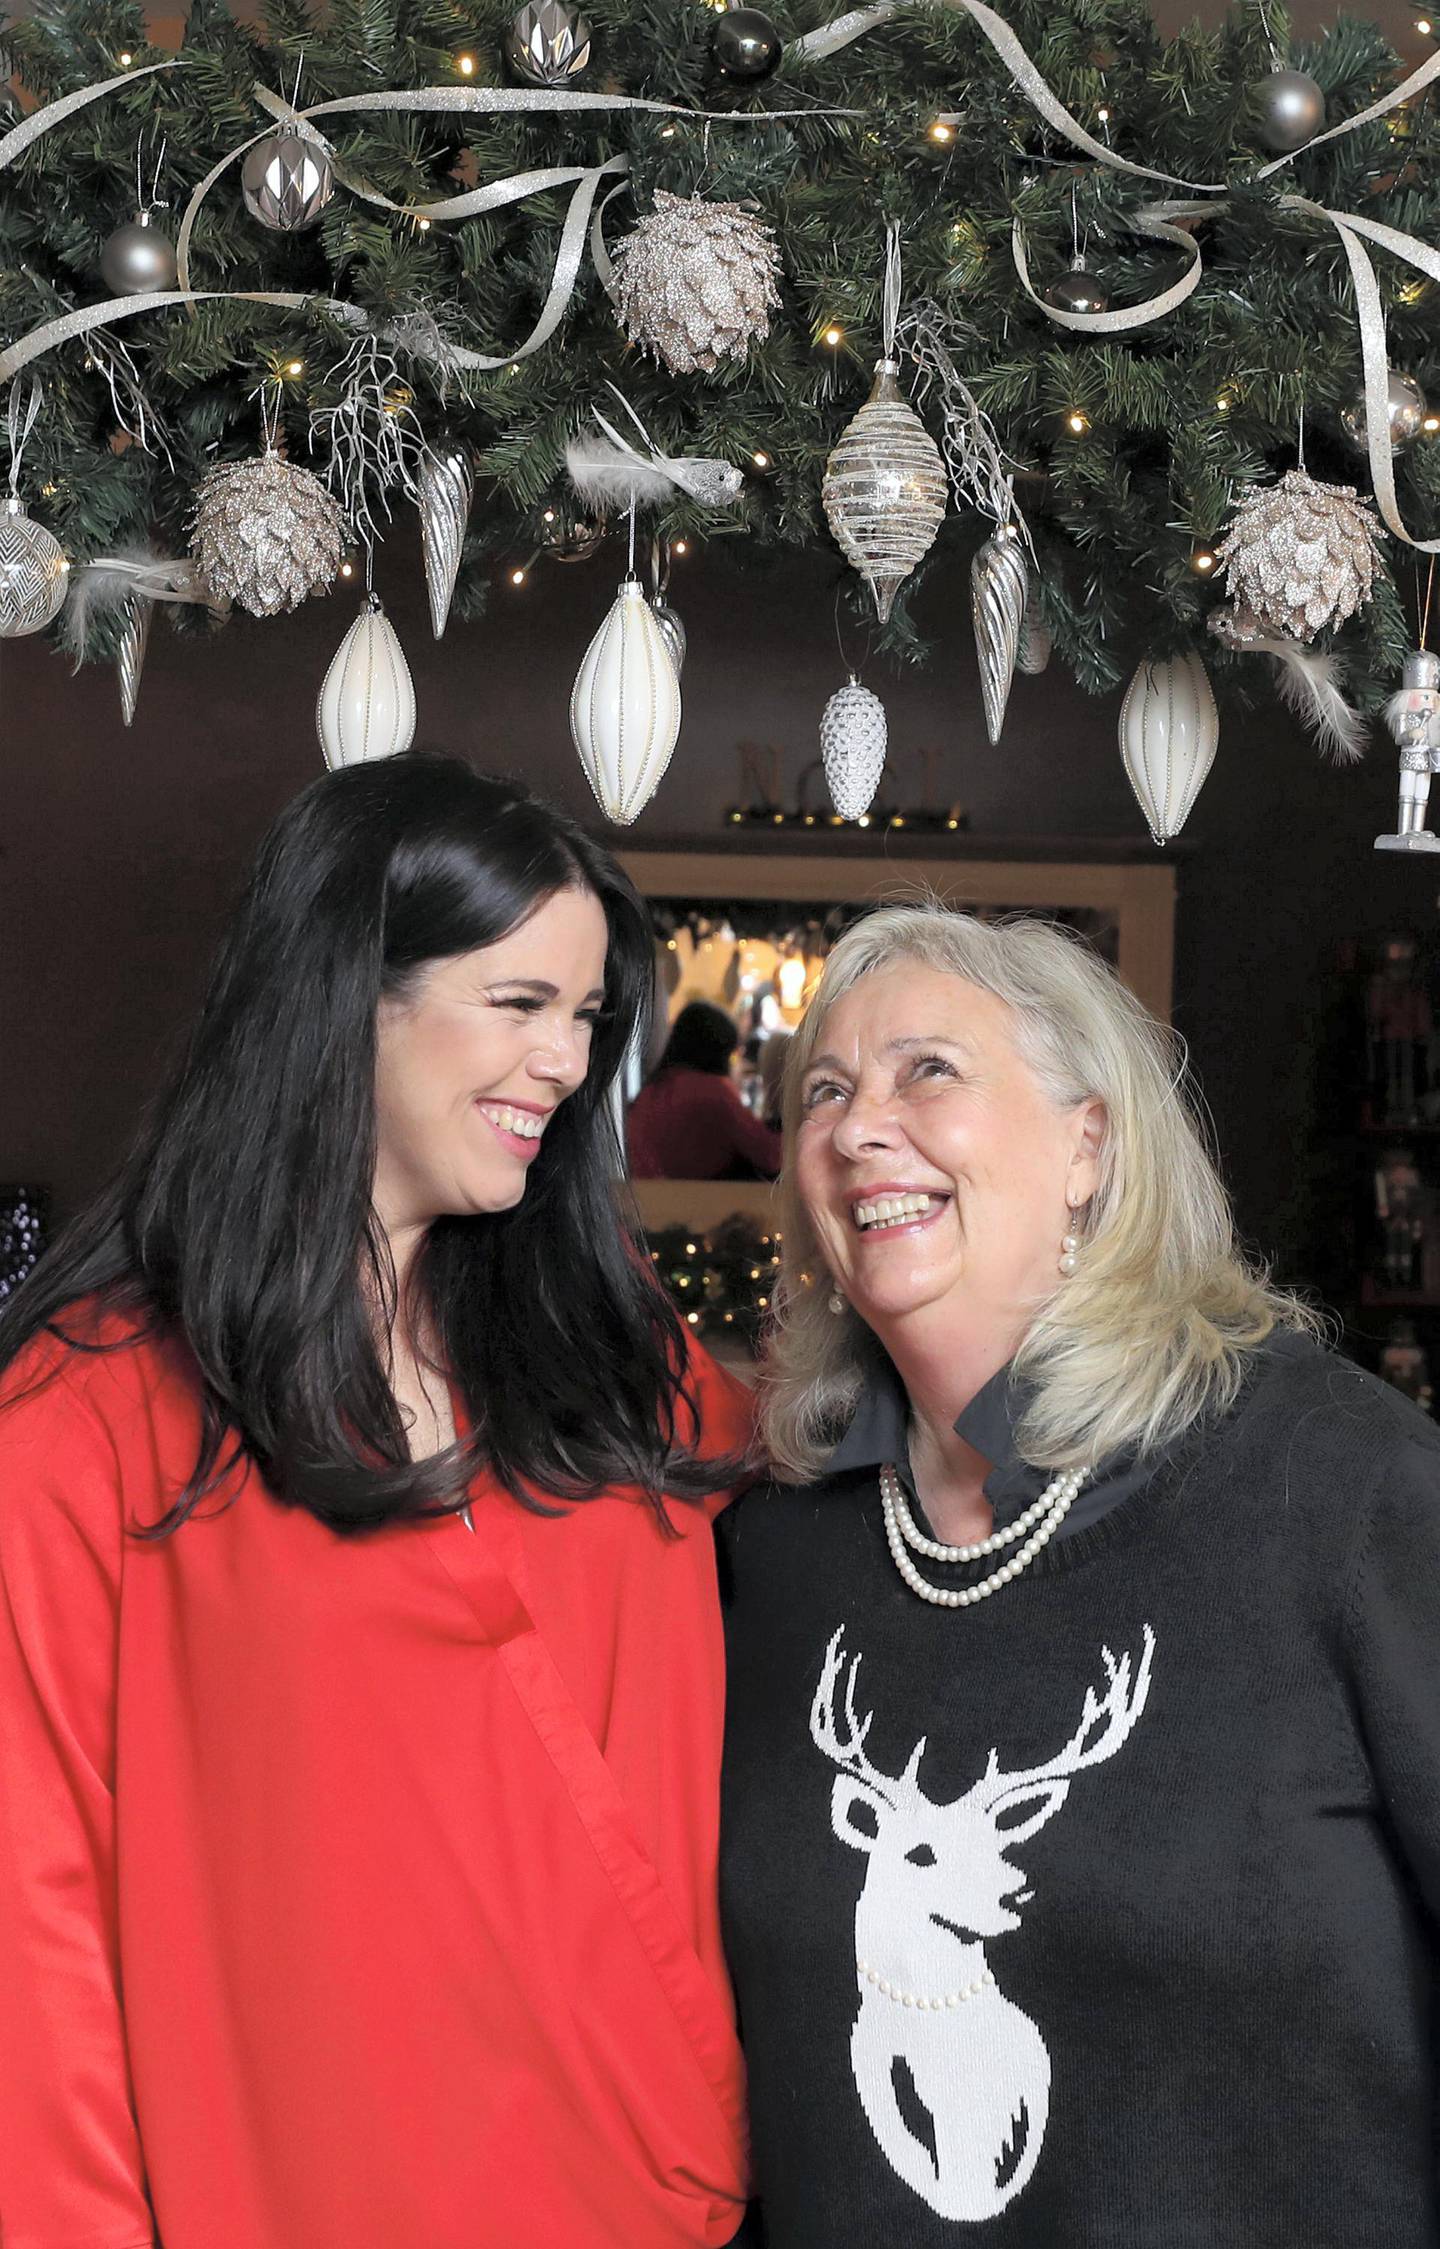 Dubai, United Arab Emirates - December 08, 2020: Christmas. Festive decorations by UAE residents. Lucy Gregory's house. Lucy with mum Lynda Rutherford, they put the decorations up together. Tuesday, December 8th, 2020 in Dubai. Chris Whiteoak / The National